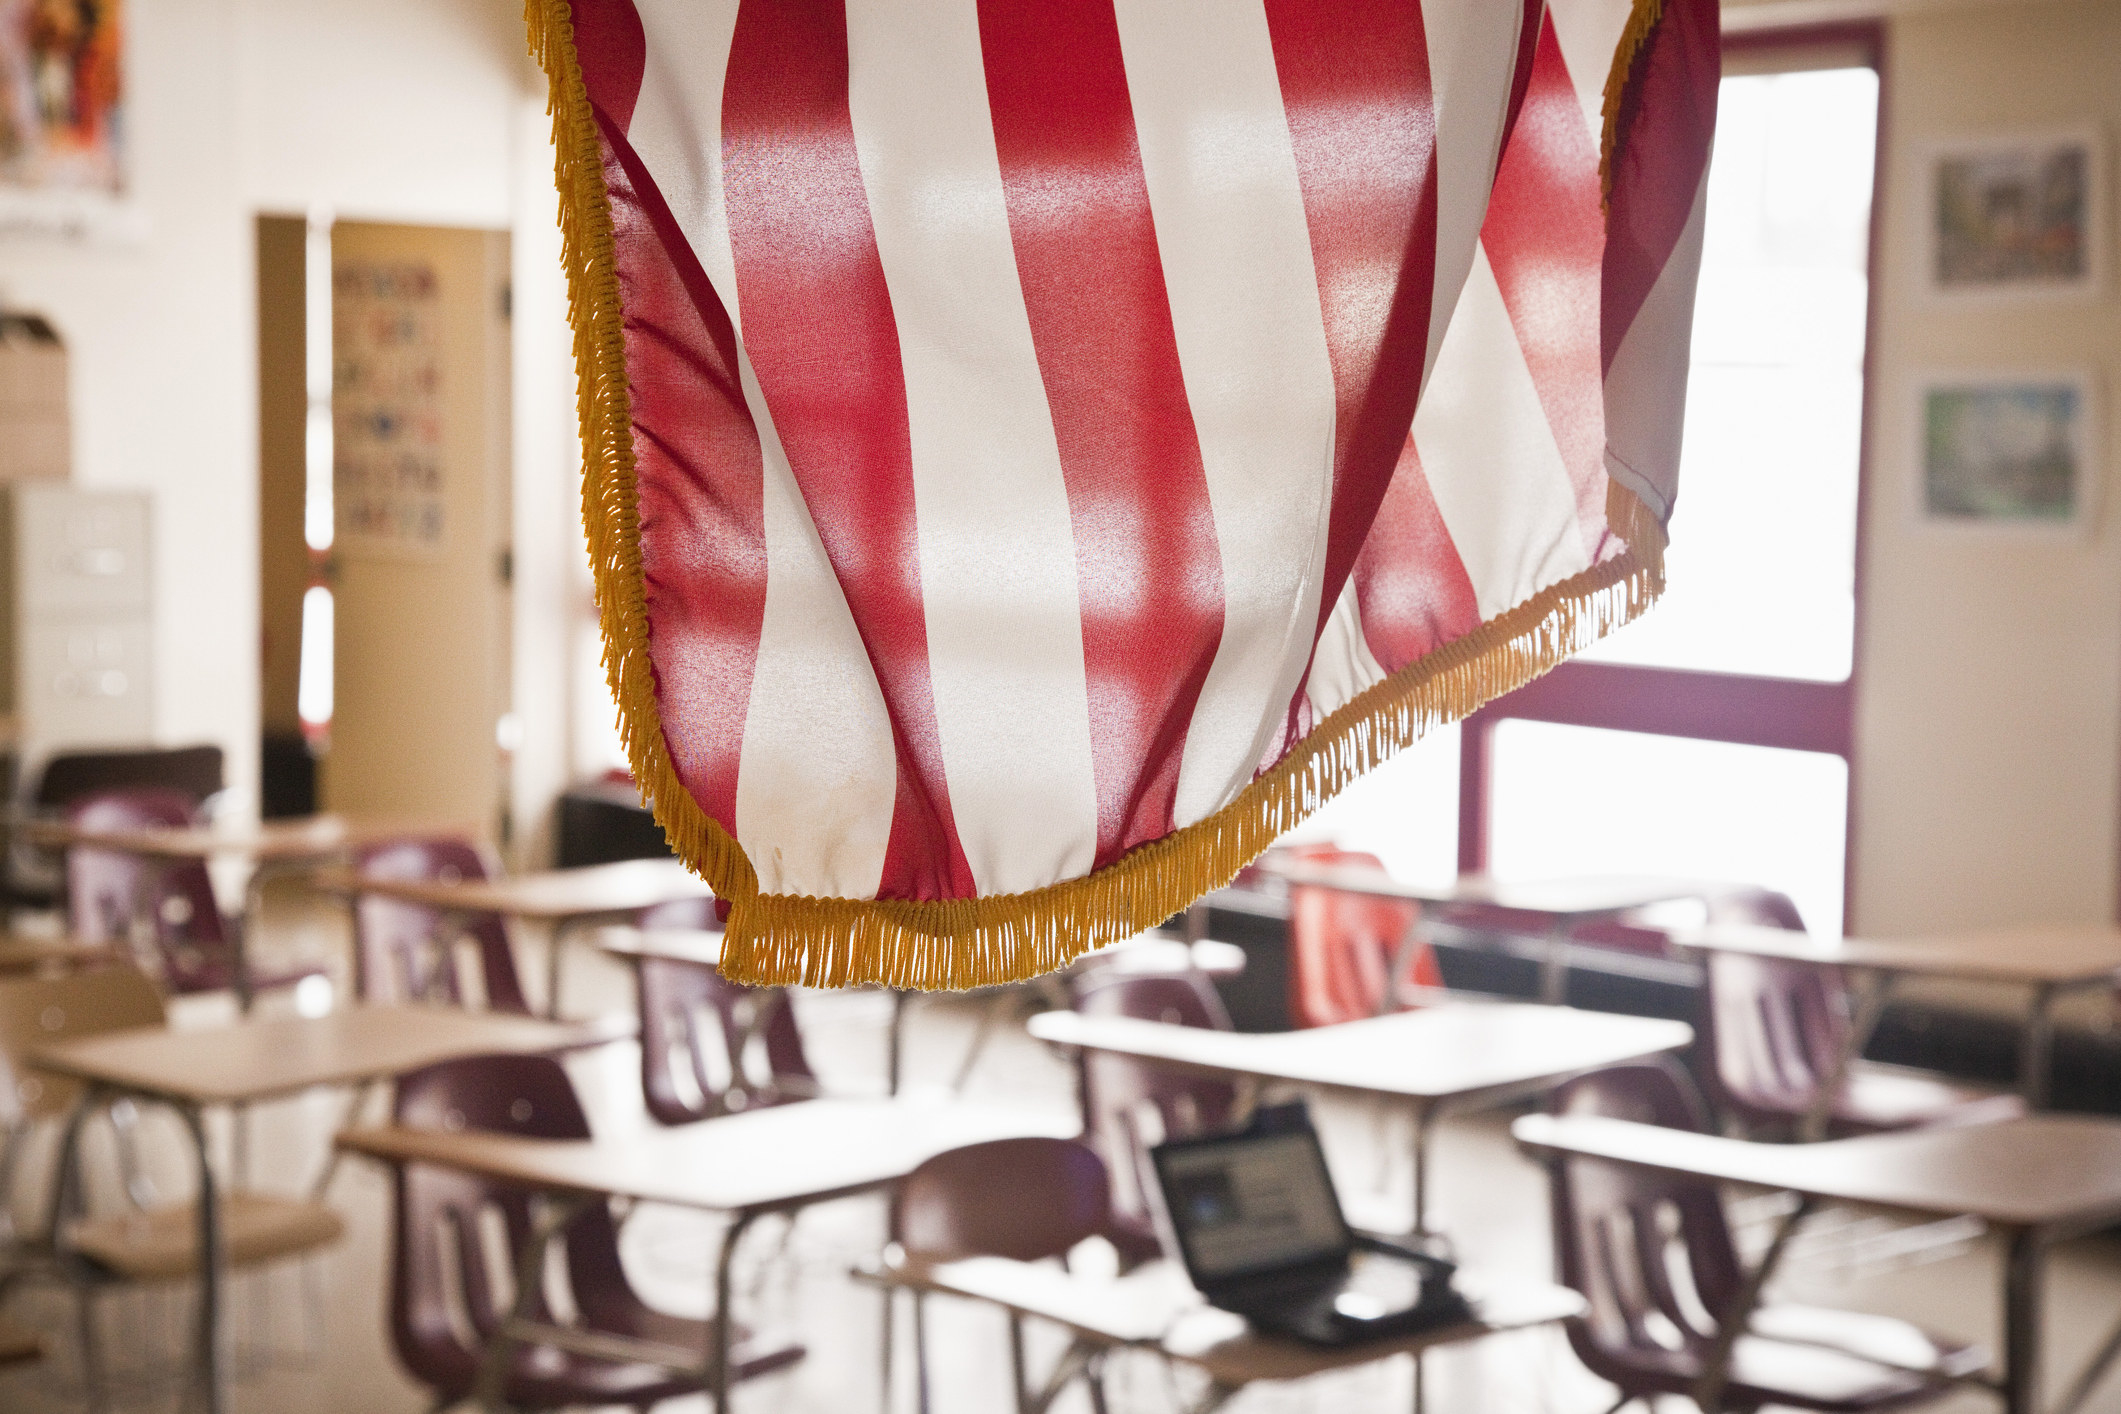 An American flag hanging in a classroom